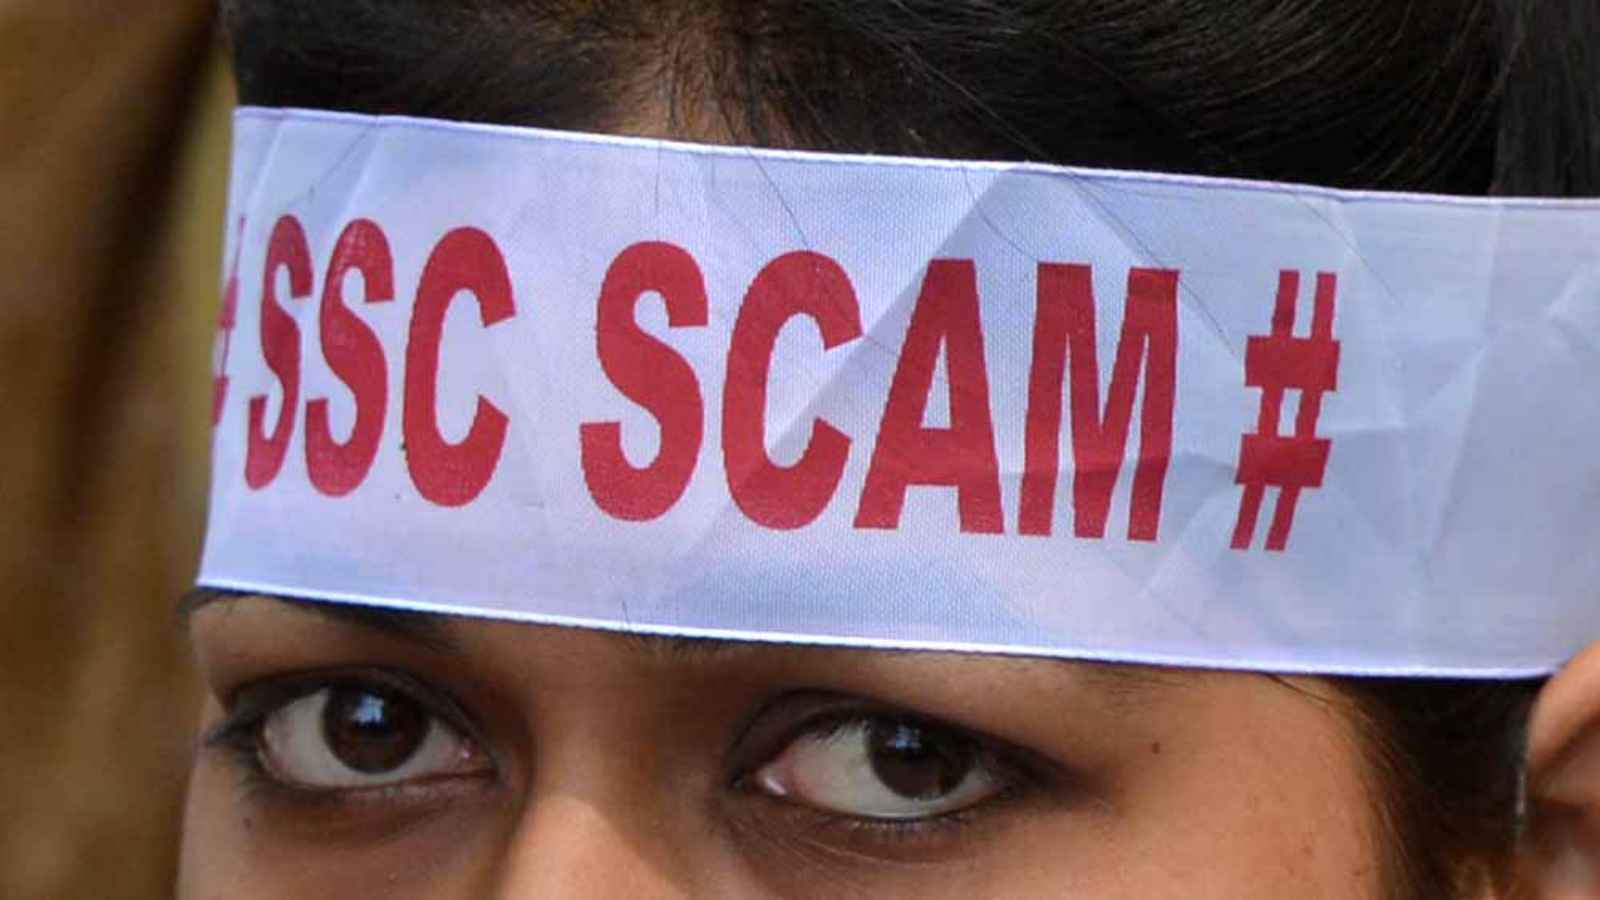 Bengal SSC scam case: CBI files charge sheet against 12 accused including WBCSSC ex-chairman